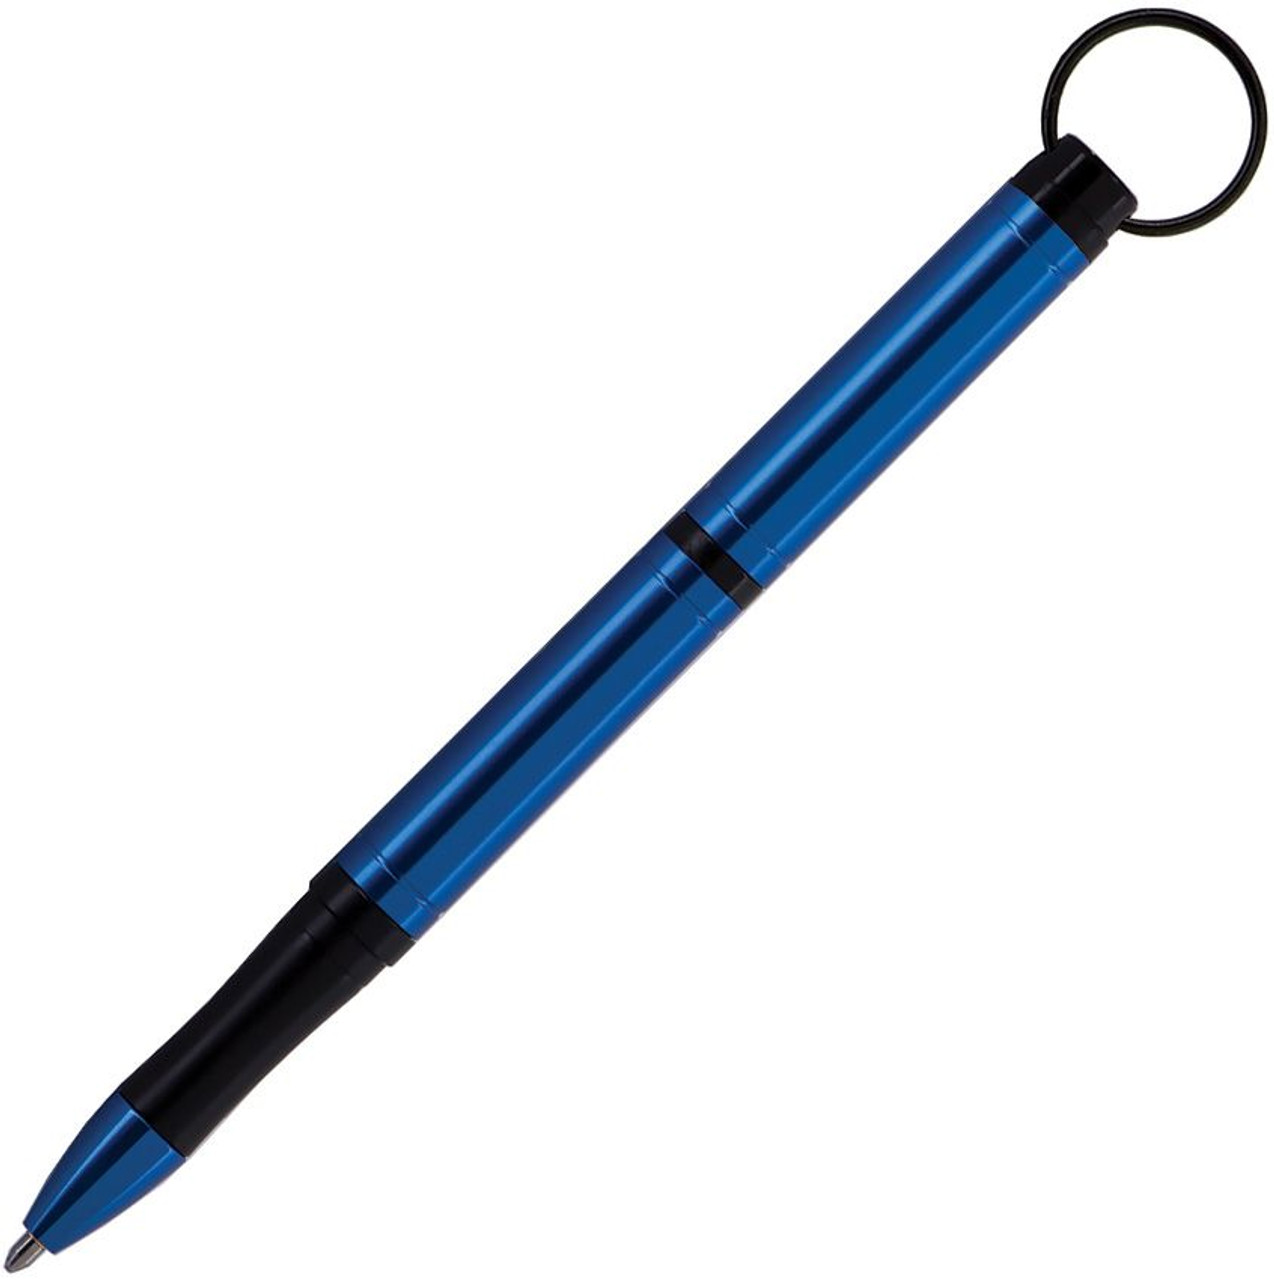 Fisher Space Pens Backpacker Keyring (FP950359) PR4 Black Ink, Anodized Blue Barrell, Anodized Black Cap